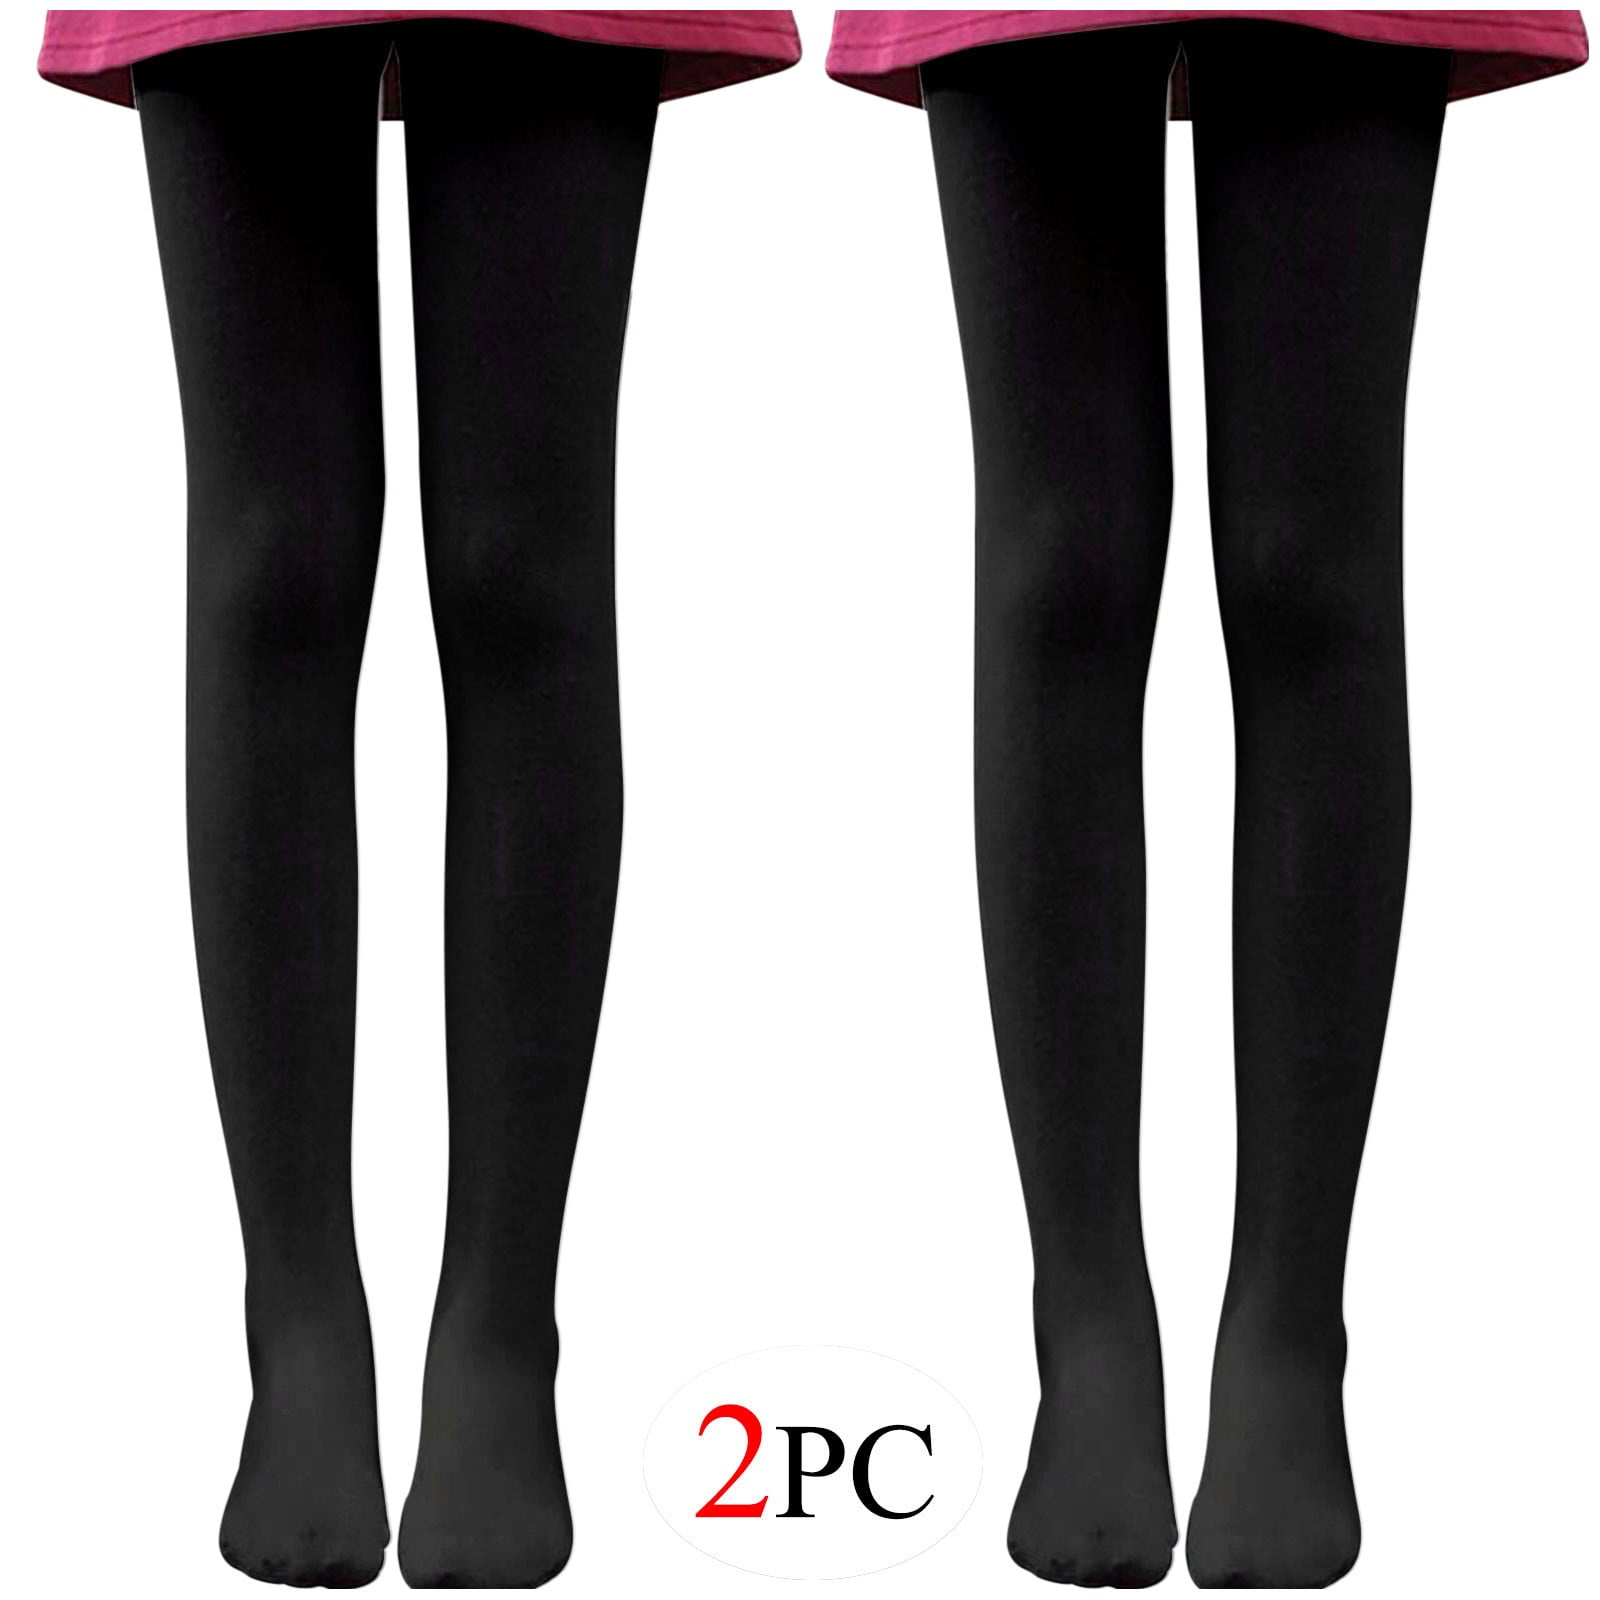 HBYJLZYG High Waisted Tights Solid Color Pantyhose, 2PC For Women All ...